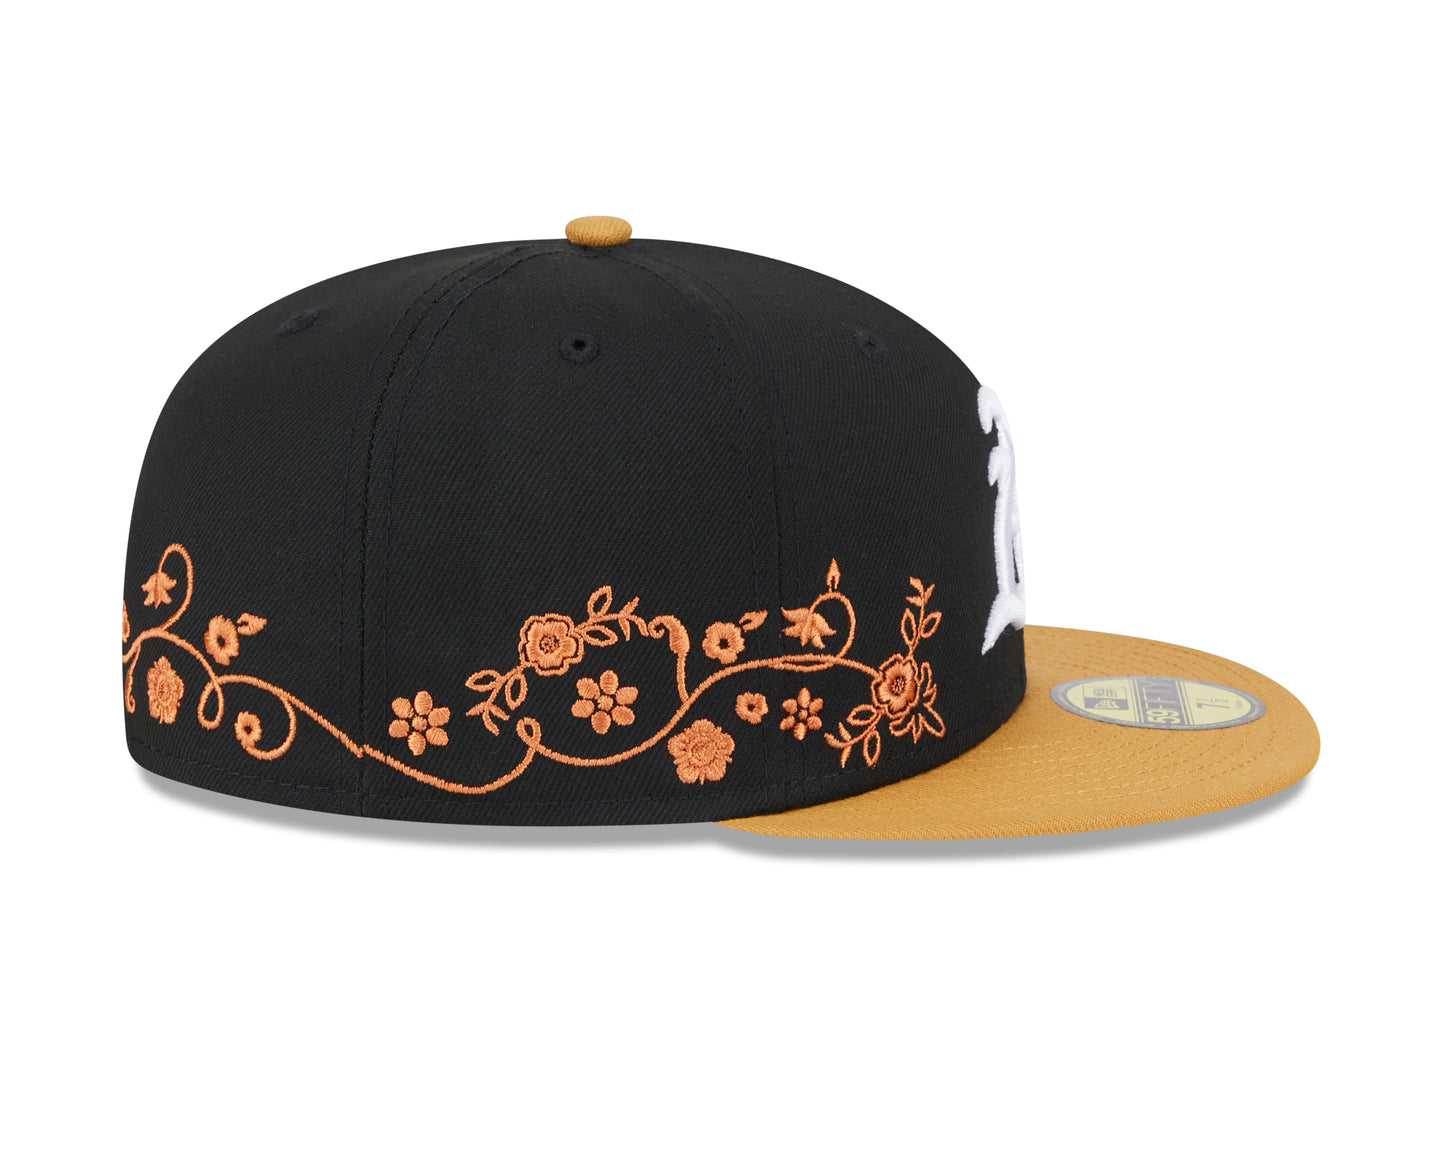 New Era - 59Fifty Fitted - FLORAL VINE - Oakland Athletics - Black - Headz Up 